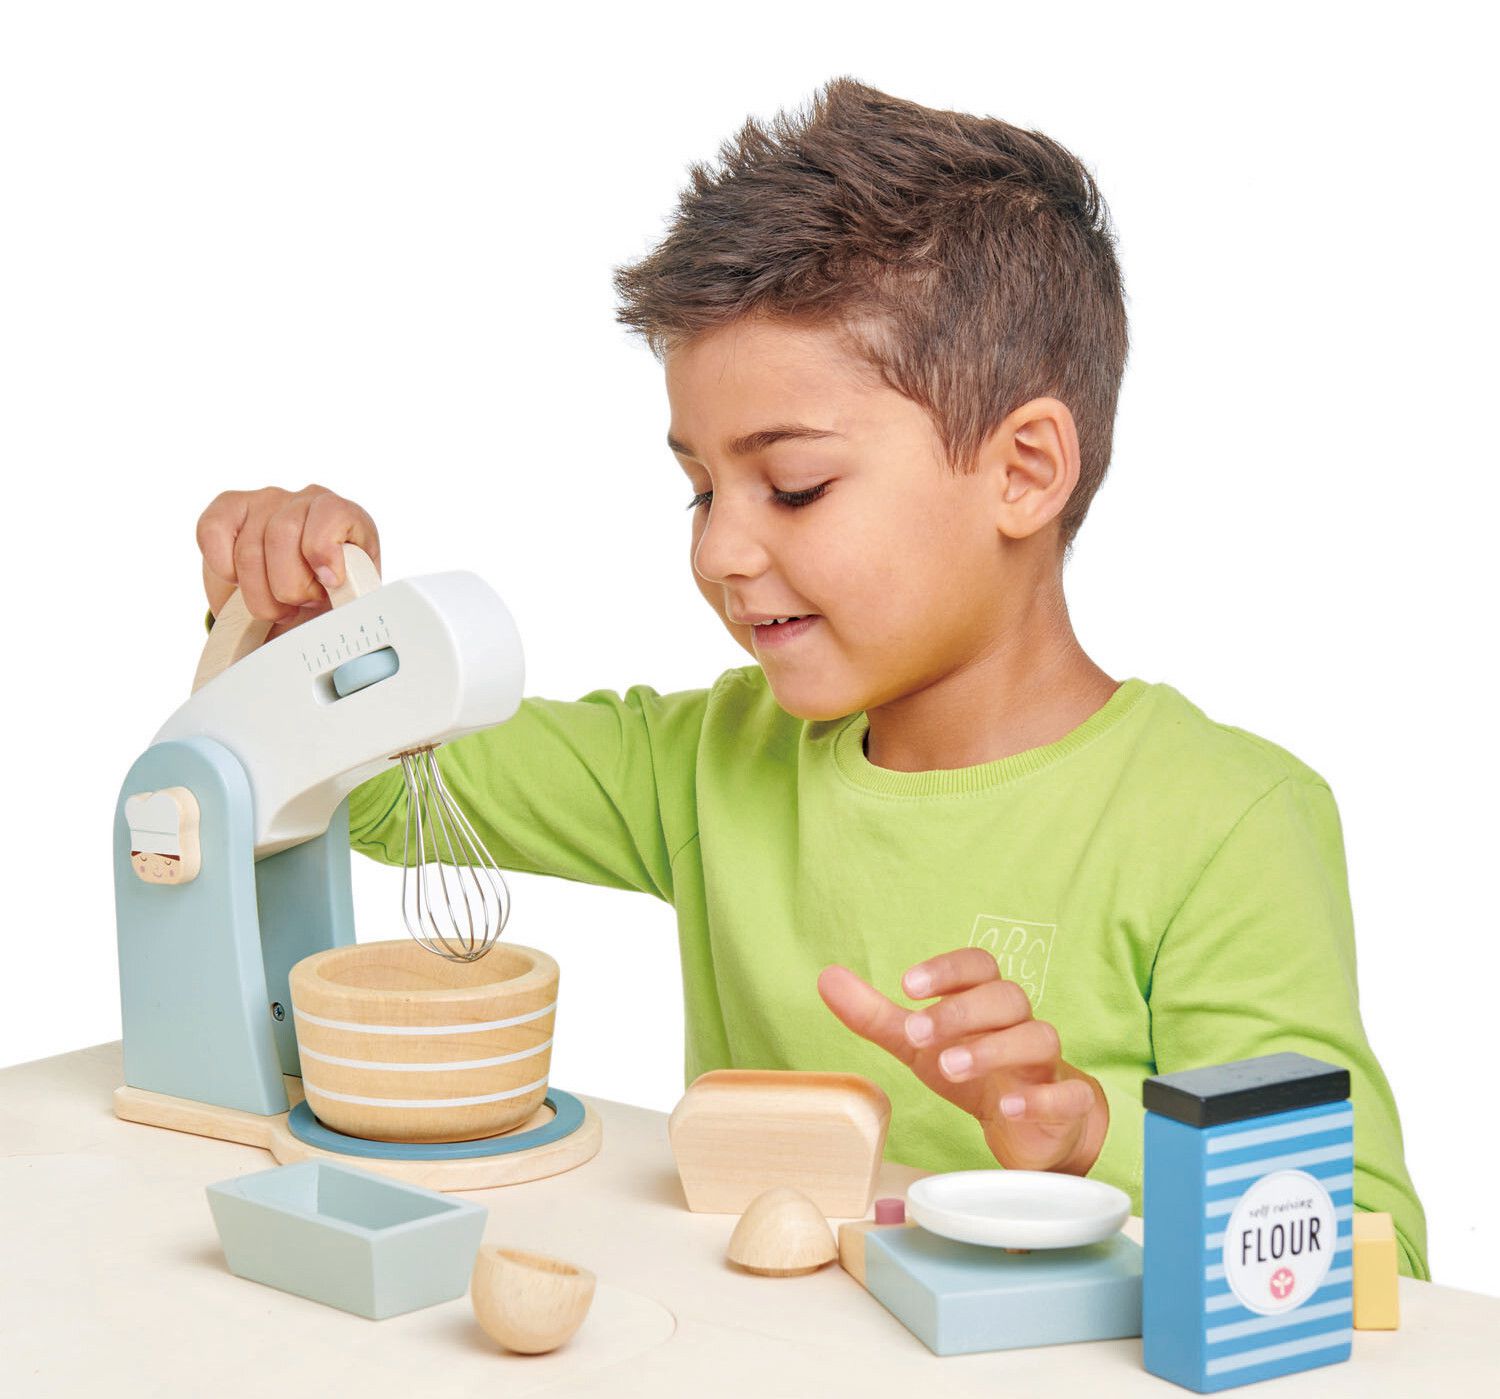 9 Gifts for Kids Who Love To Cook, According to a Kid Who Loves To Cook